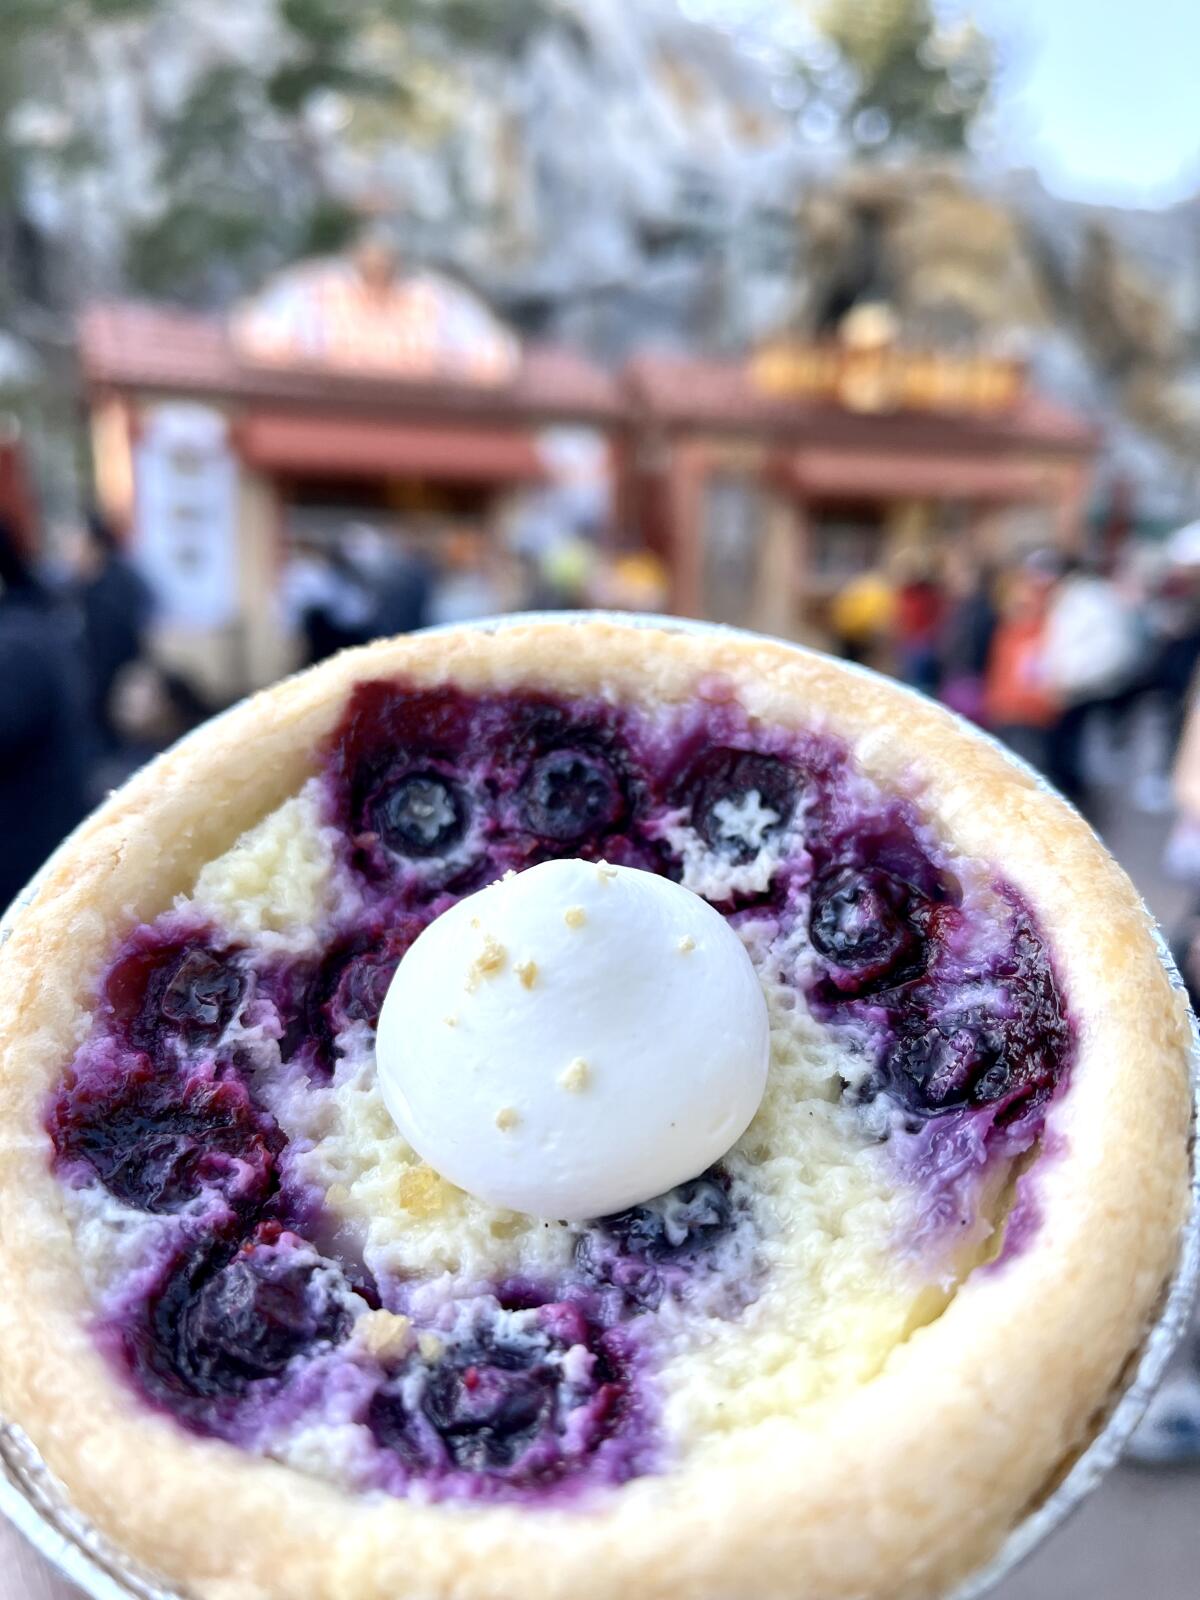 Blueberry buttermilk pie from Berry Patch.